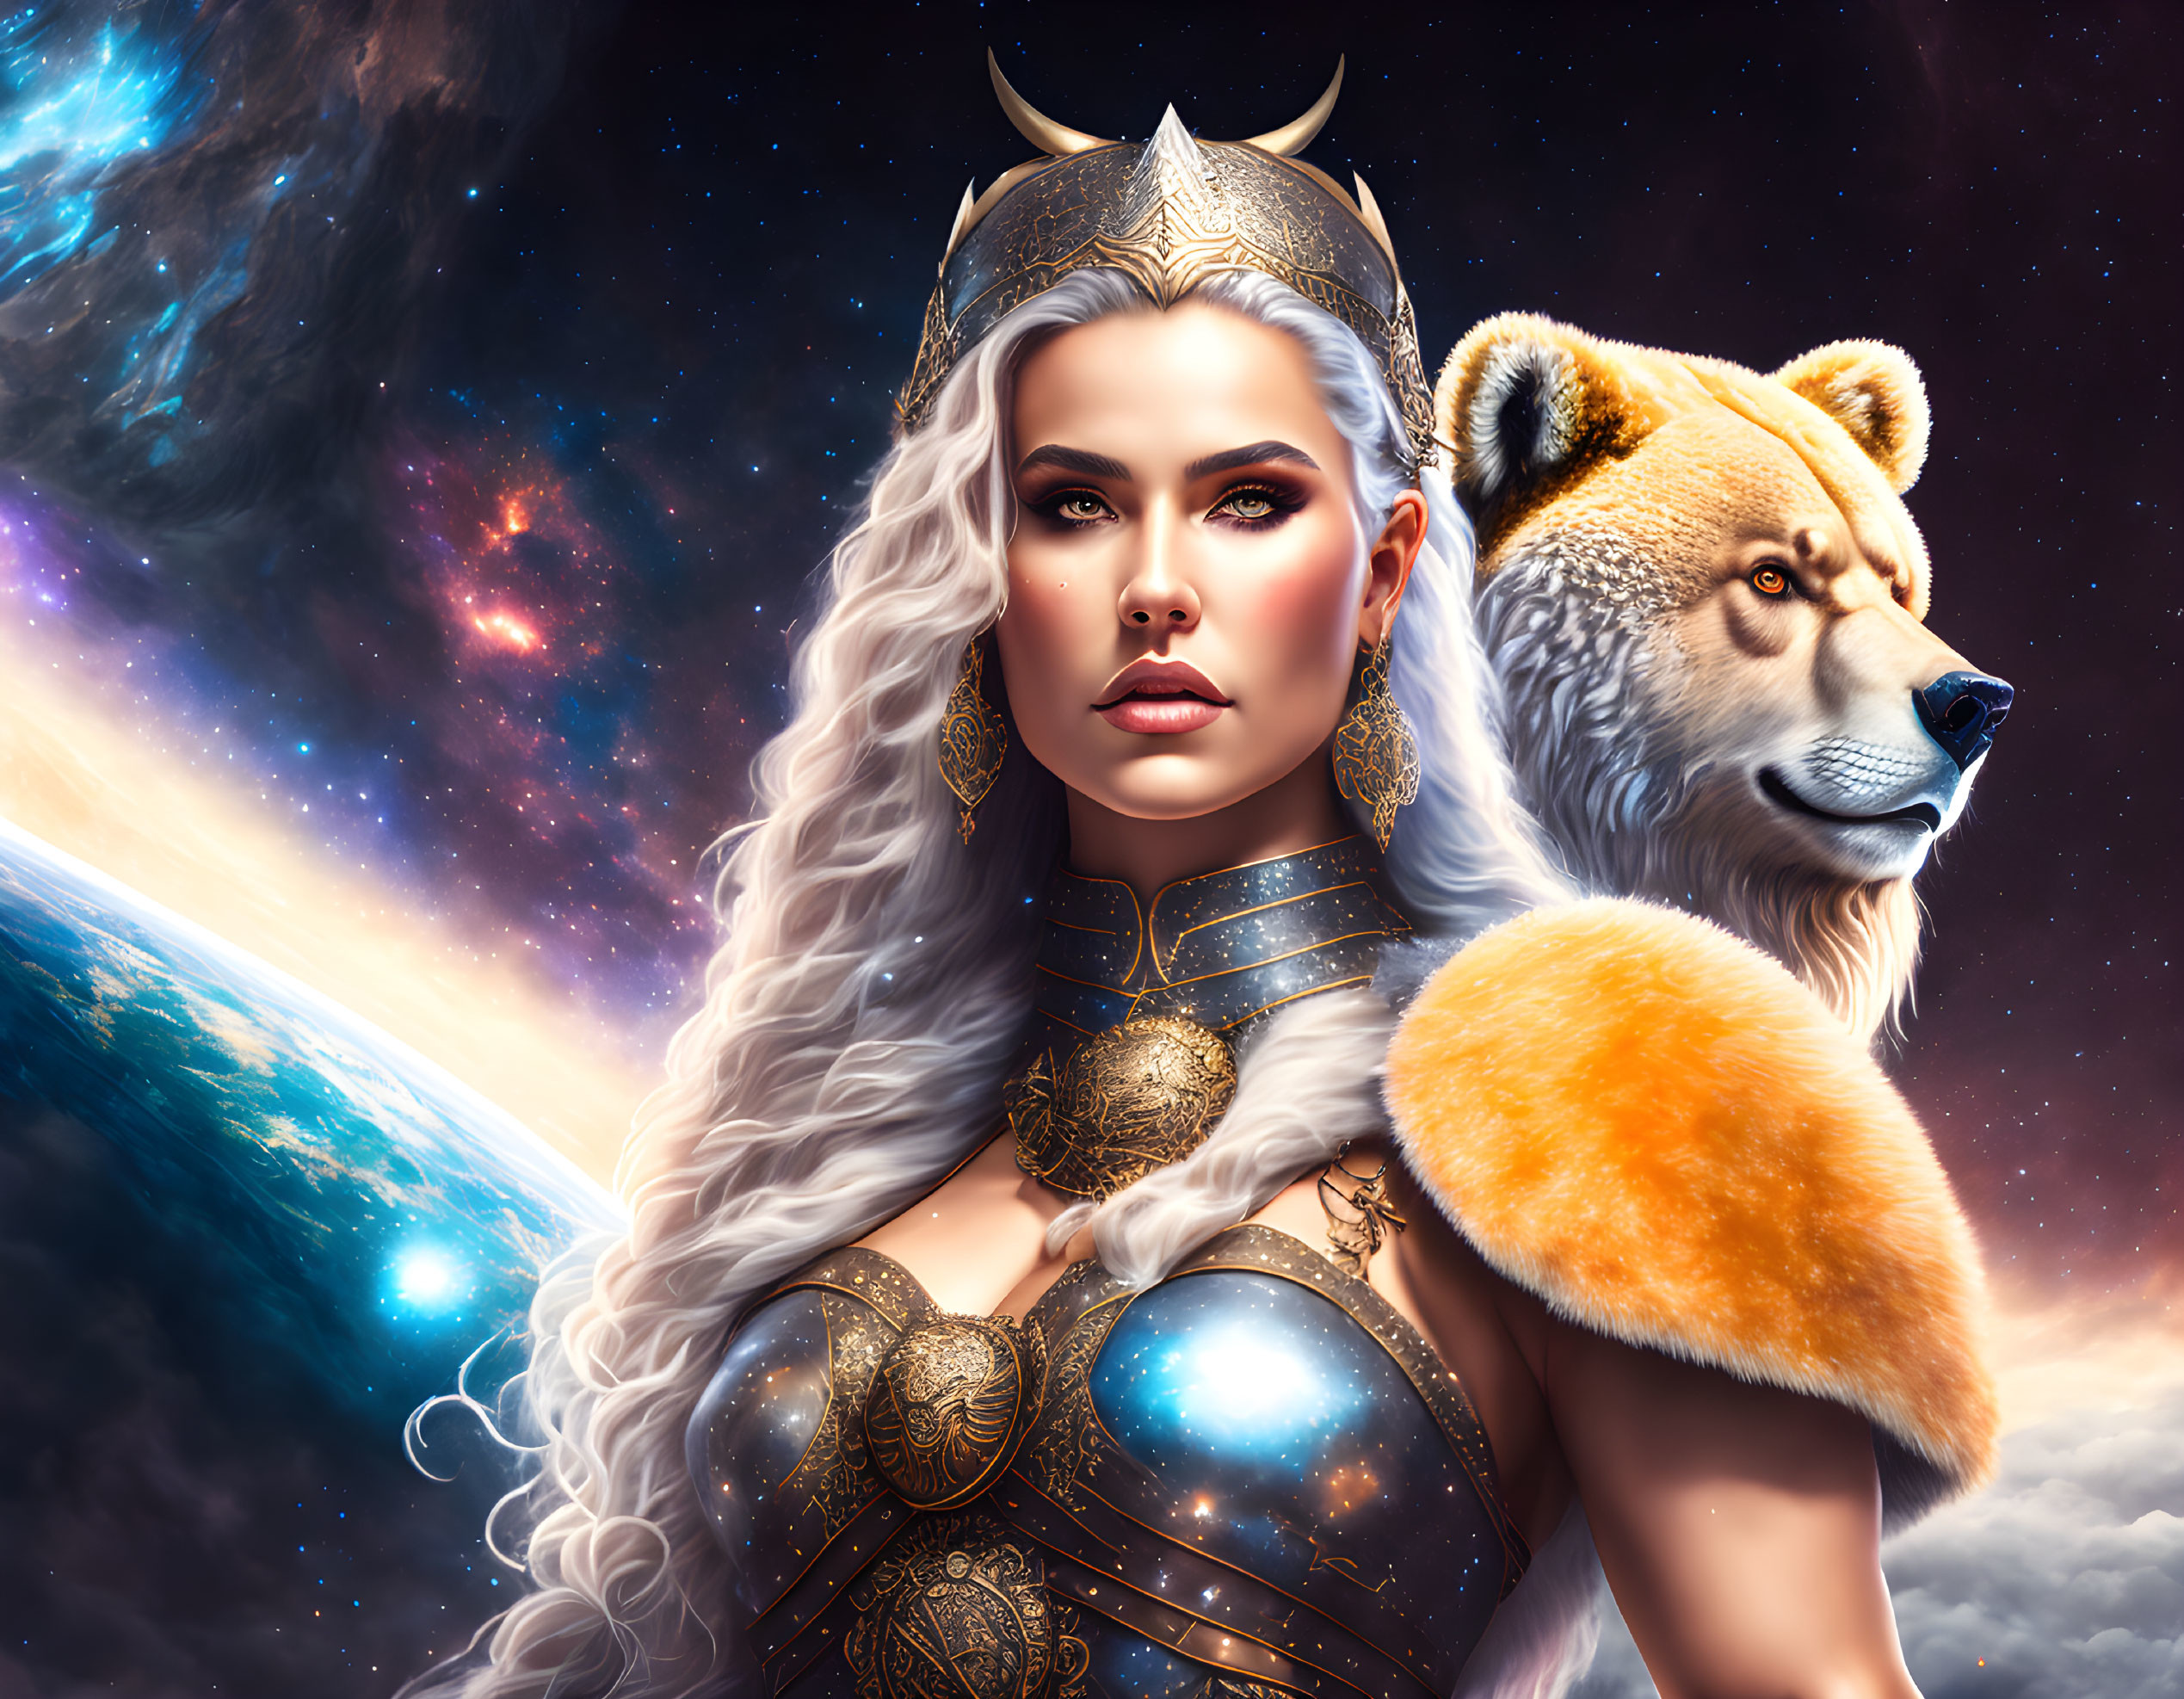 Fantasy illustration of warrior woman with silver hair and armor and majestic bear in cosmic setting